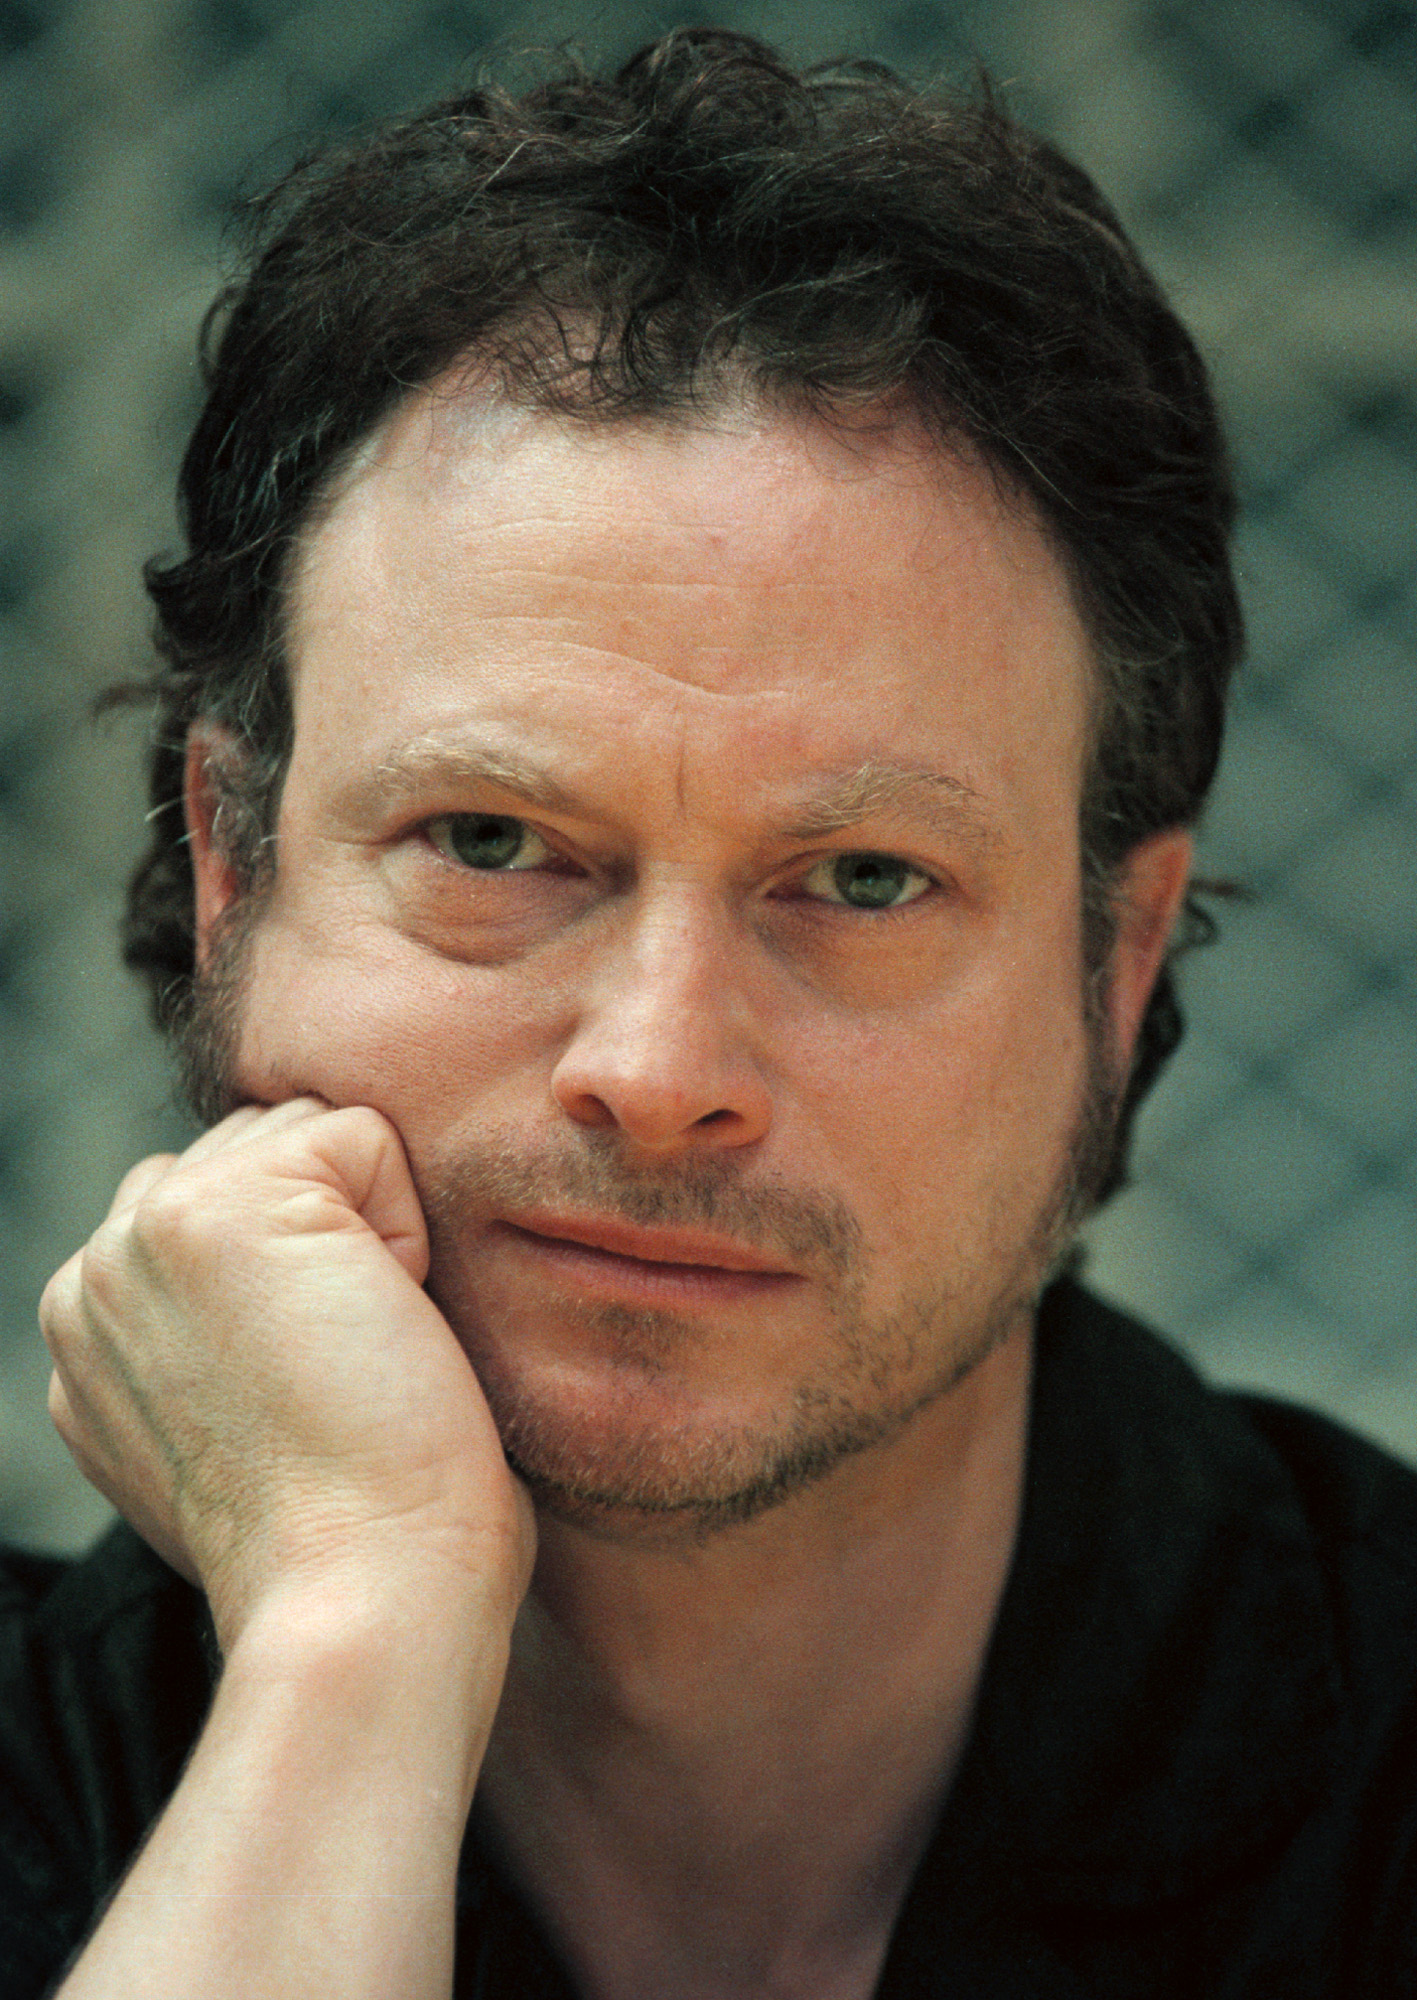 Actor Gary Sinise poses for a photograph June 16, 2000, on the set of "One Flew Over The Cuckoo''s Nest" at the Steppenwolf Theater in Chicago | Source: Getty Images